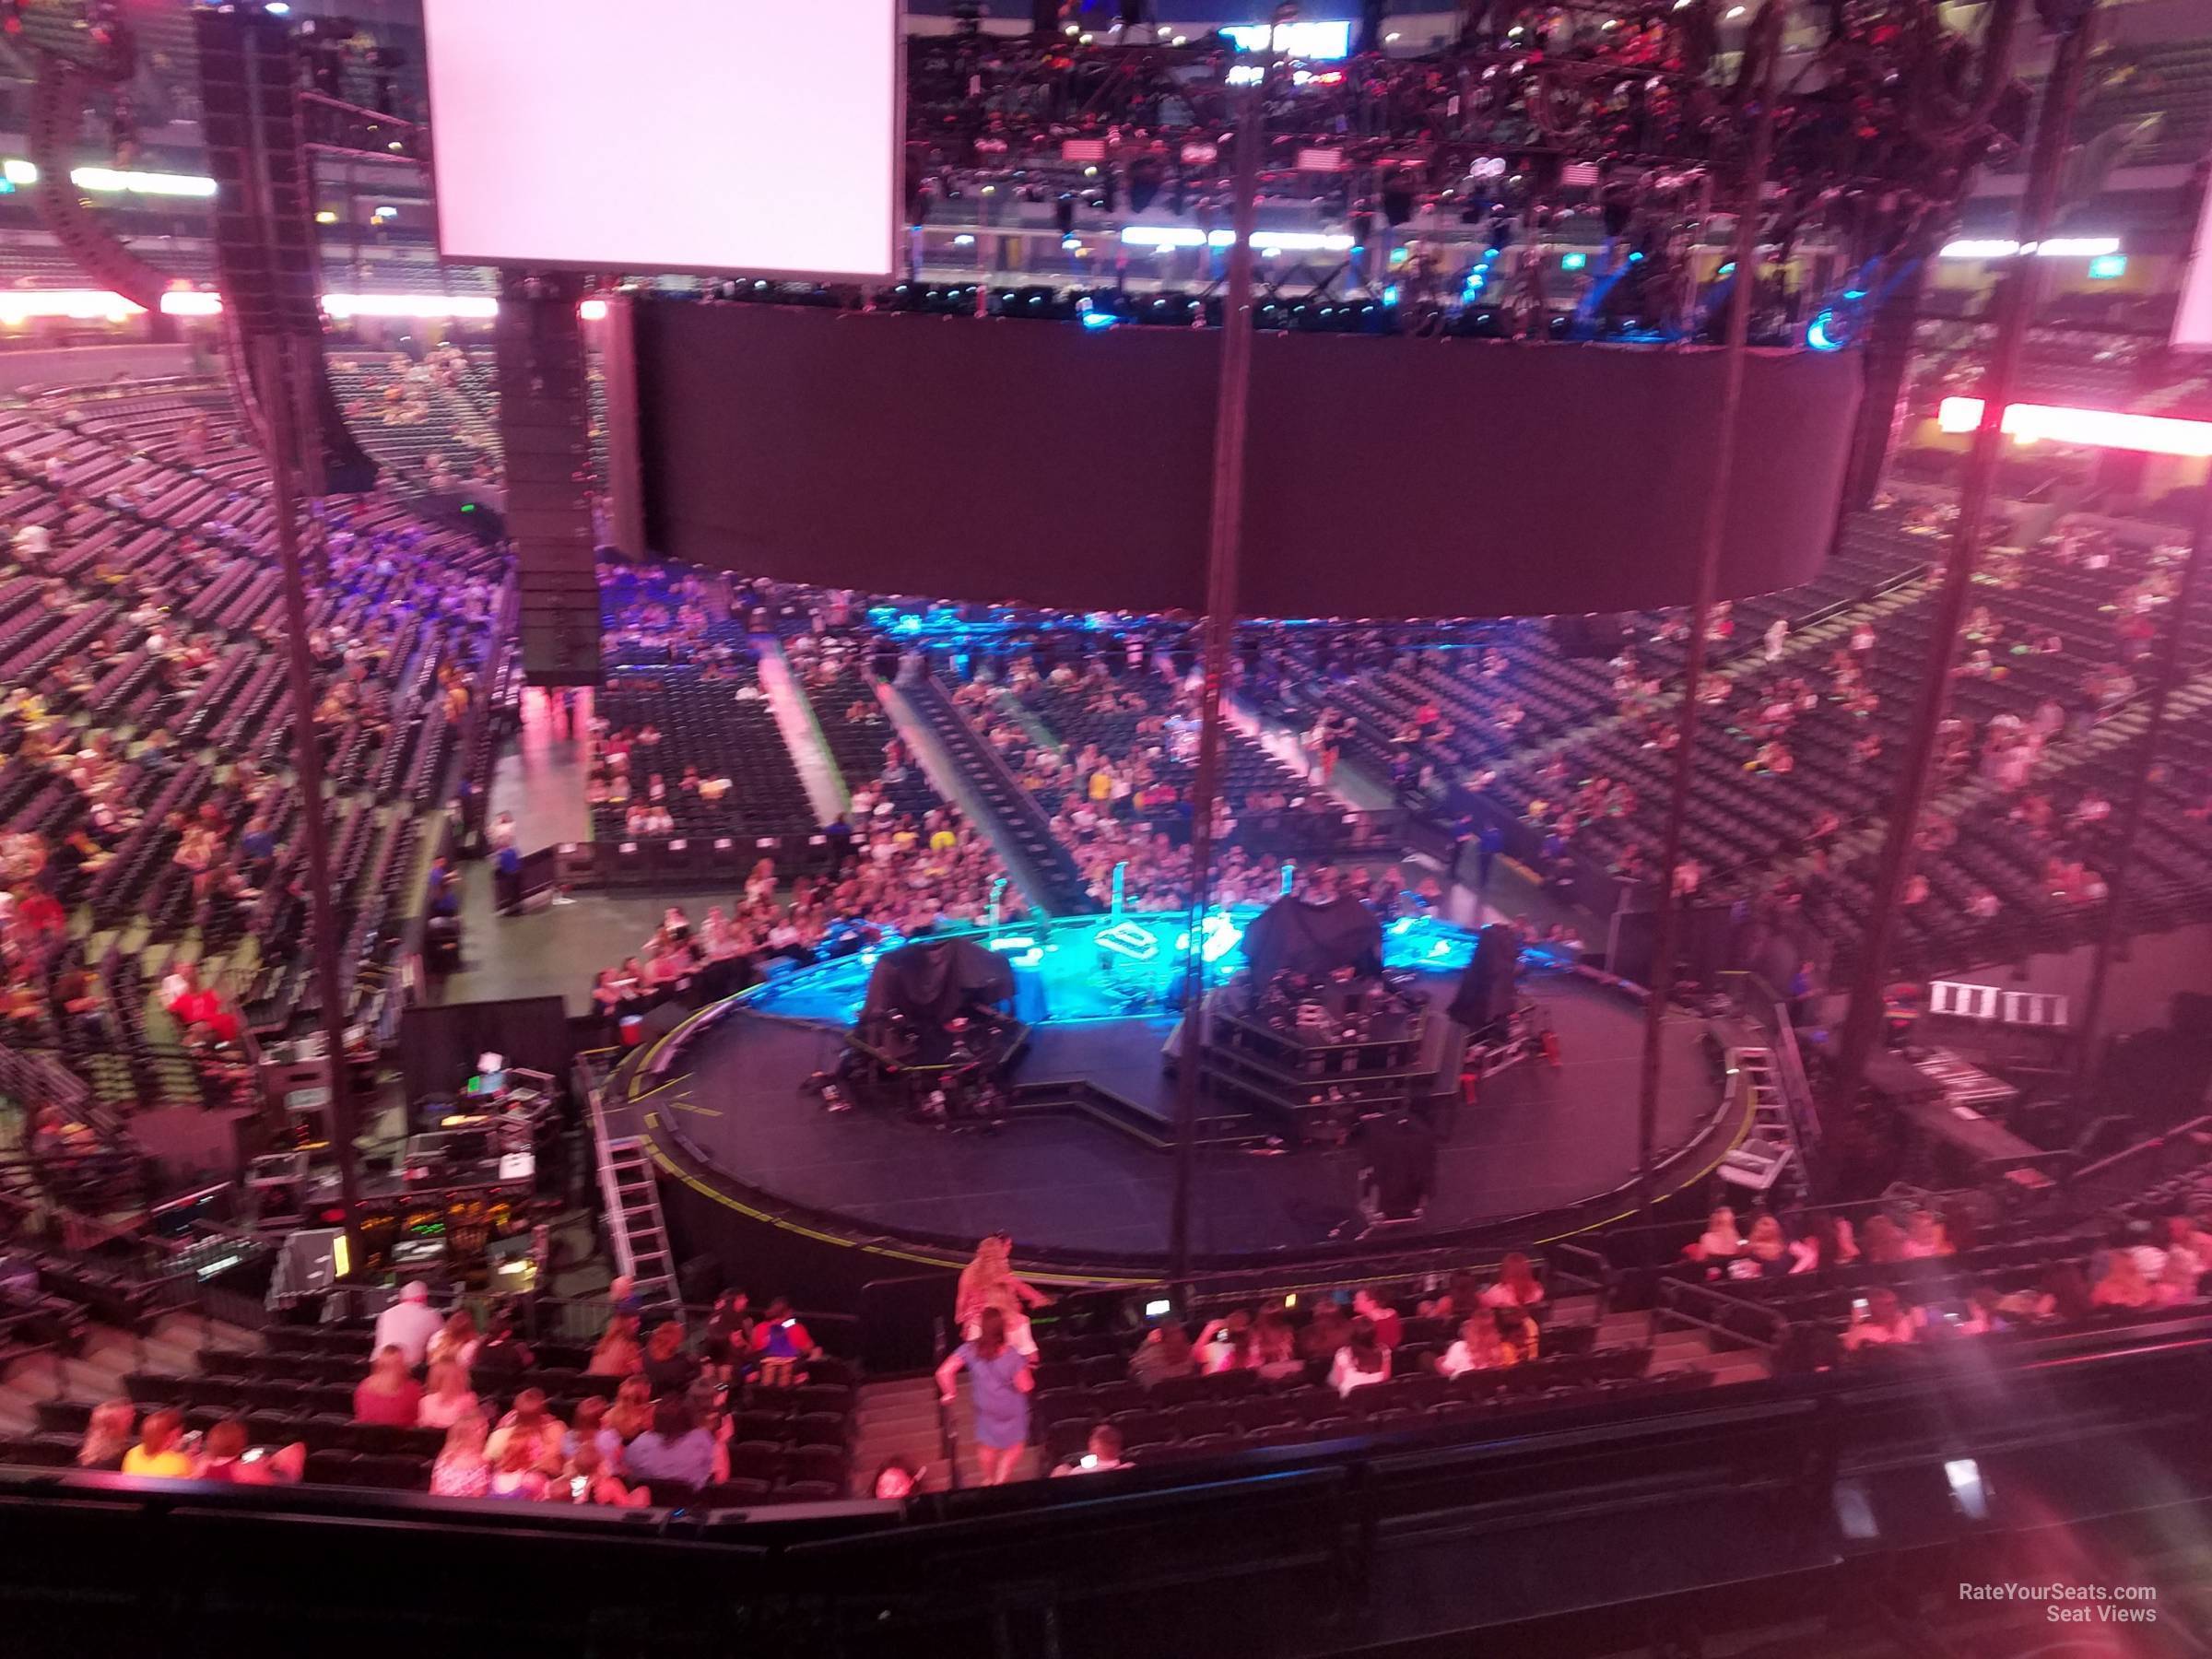 section 248, row 4 seat view  for concert - ball arena